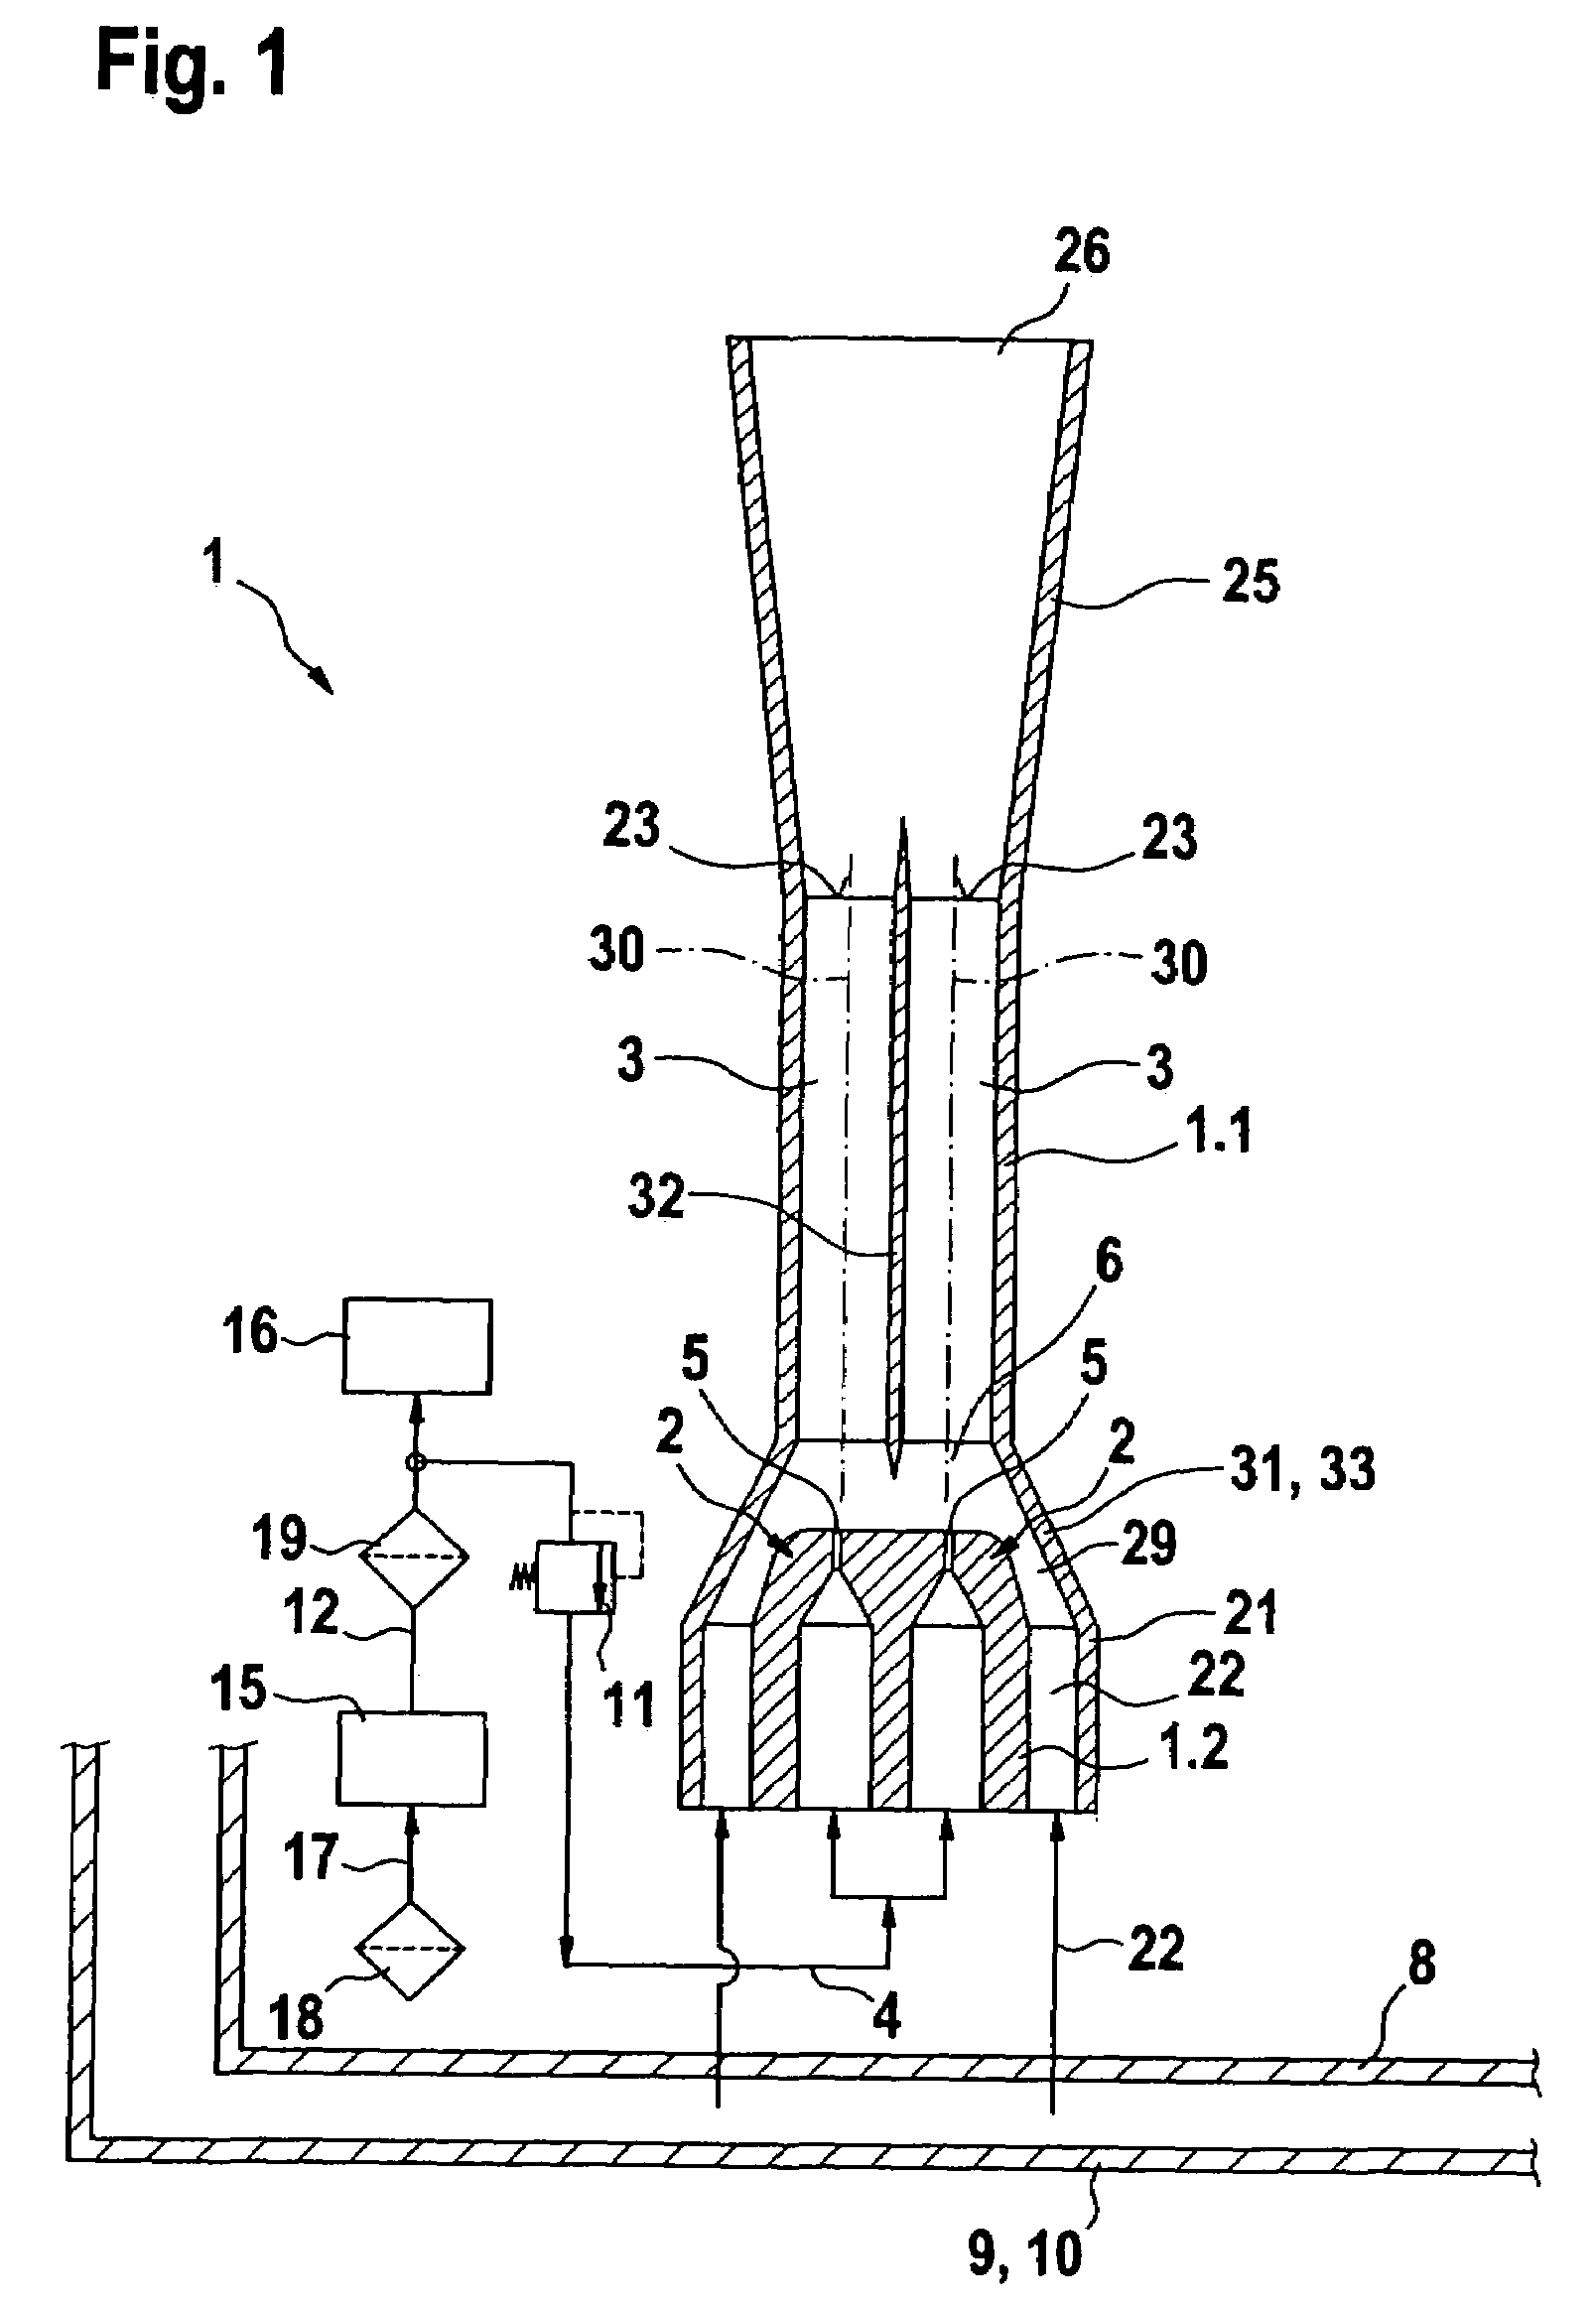 Apparatus for pumping fuel